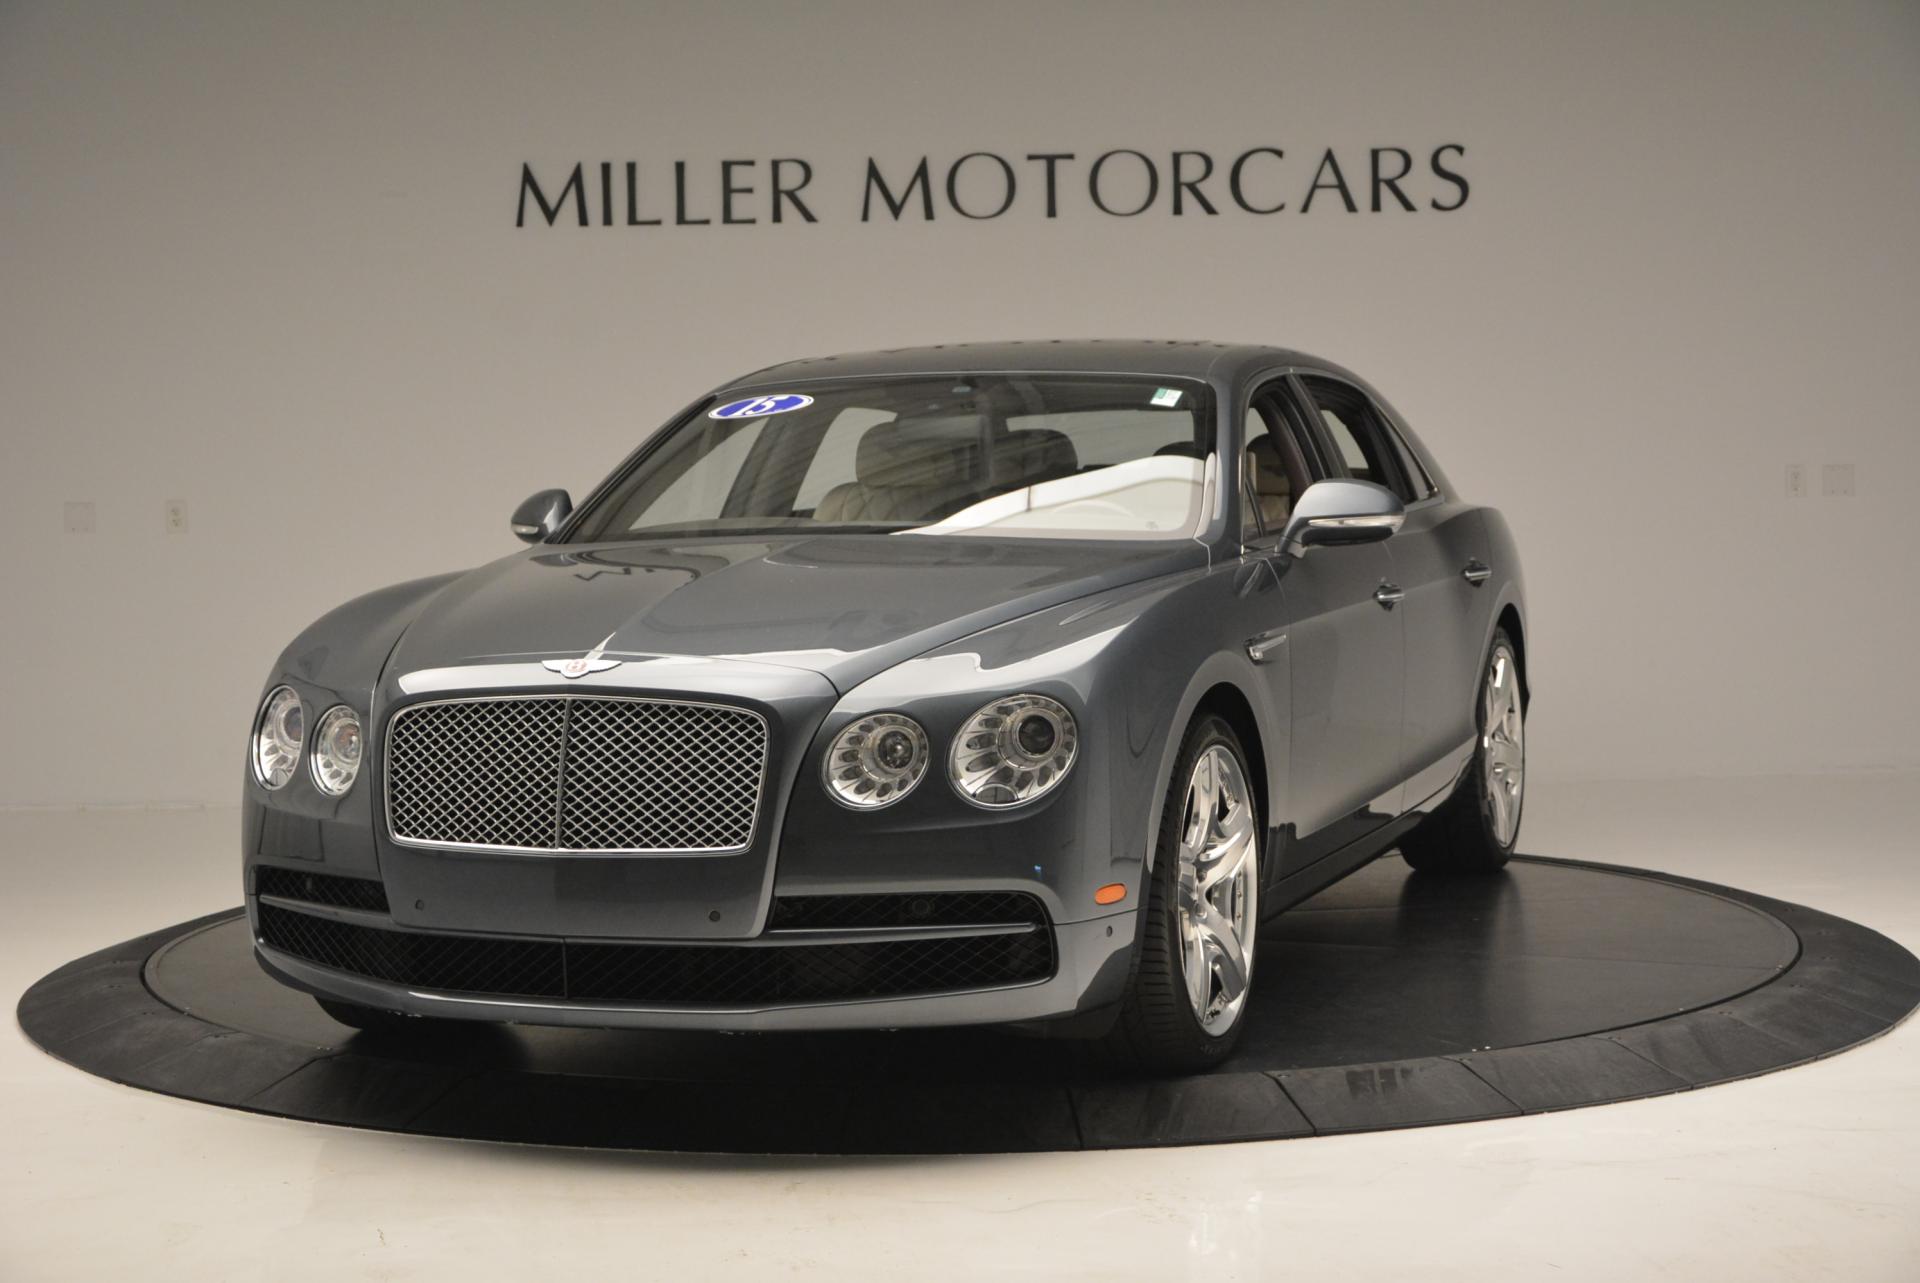 Used 2015 Bentley Flying Spur V8 for sale Sold at Alfa Romeo of Greenwich in Greenwich CT 06830 1